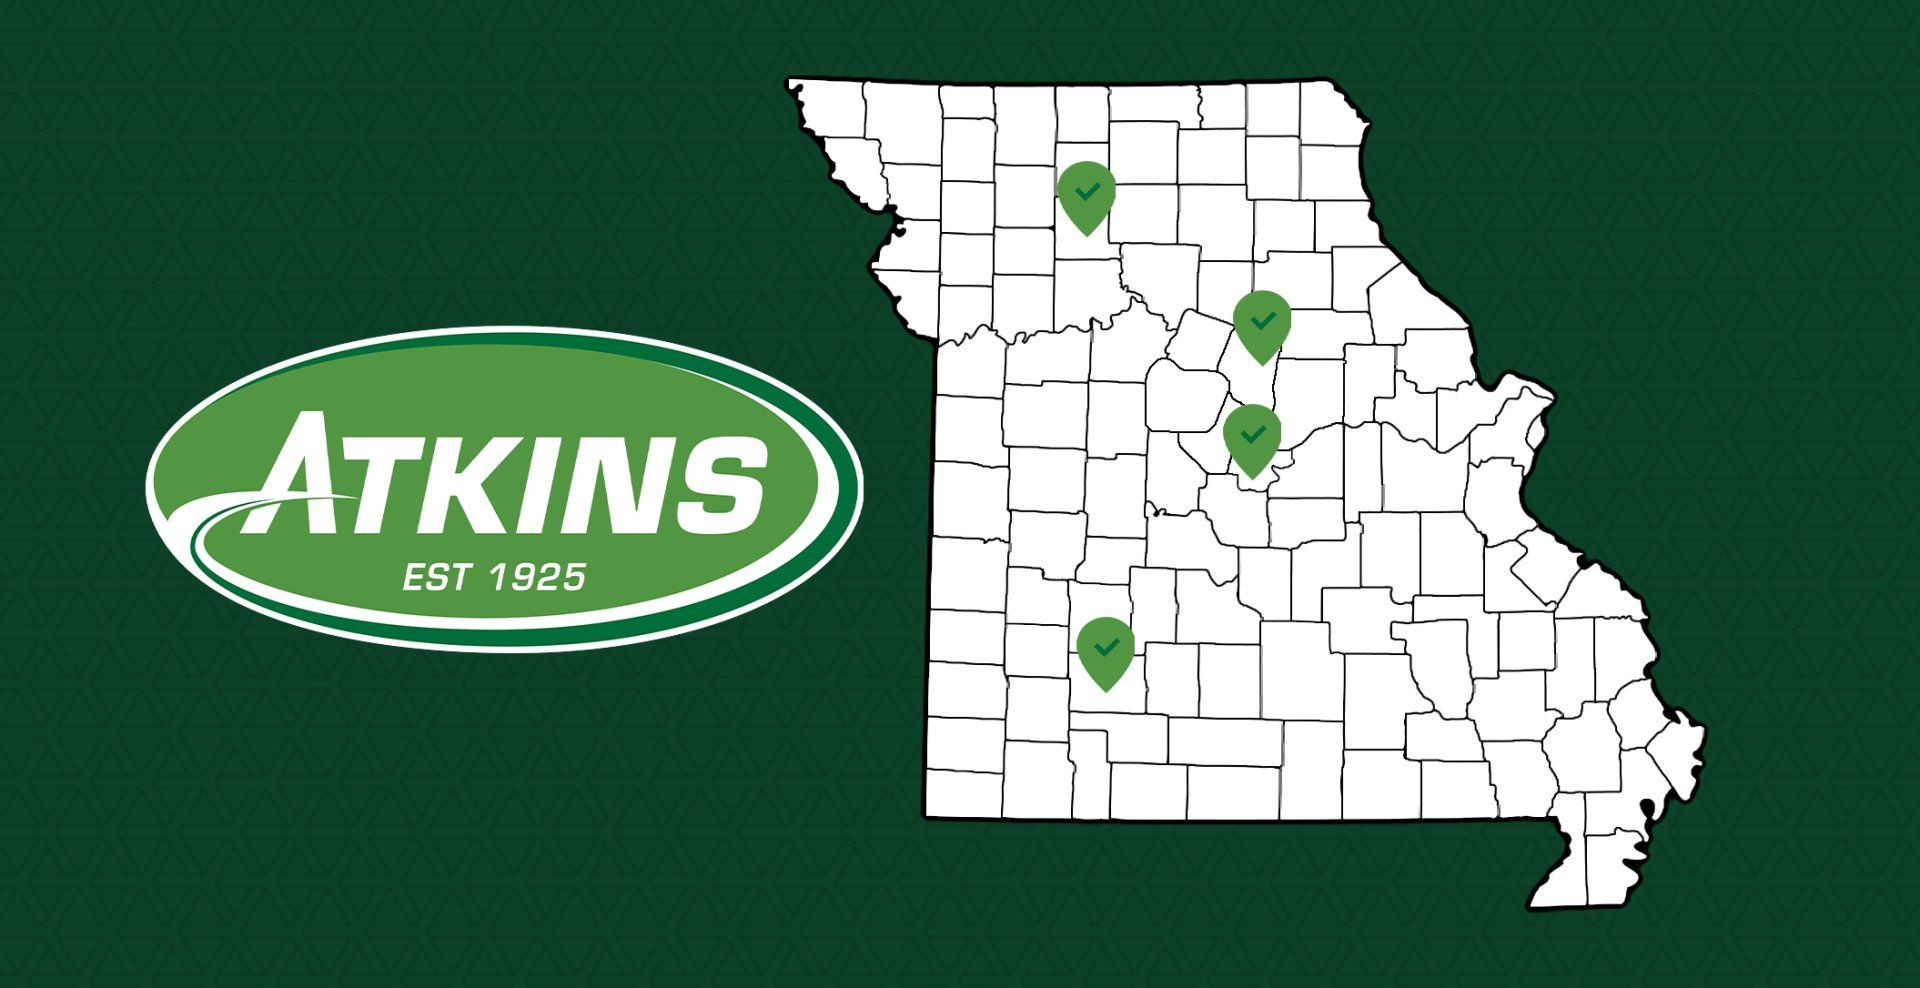 Atkins Offers Commercial Snow Removal to Several Mid-MO Locations, Including Columbia, MO.